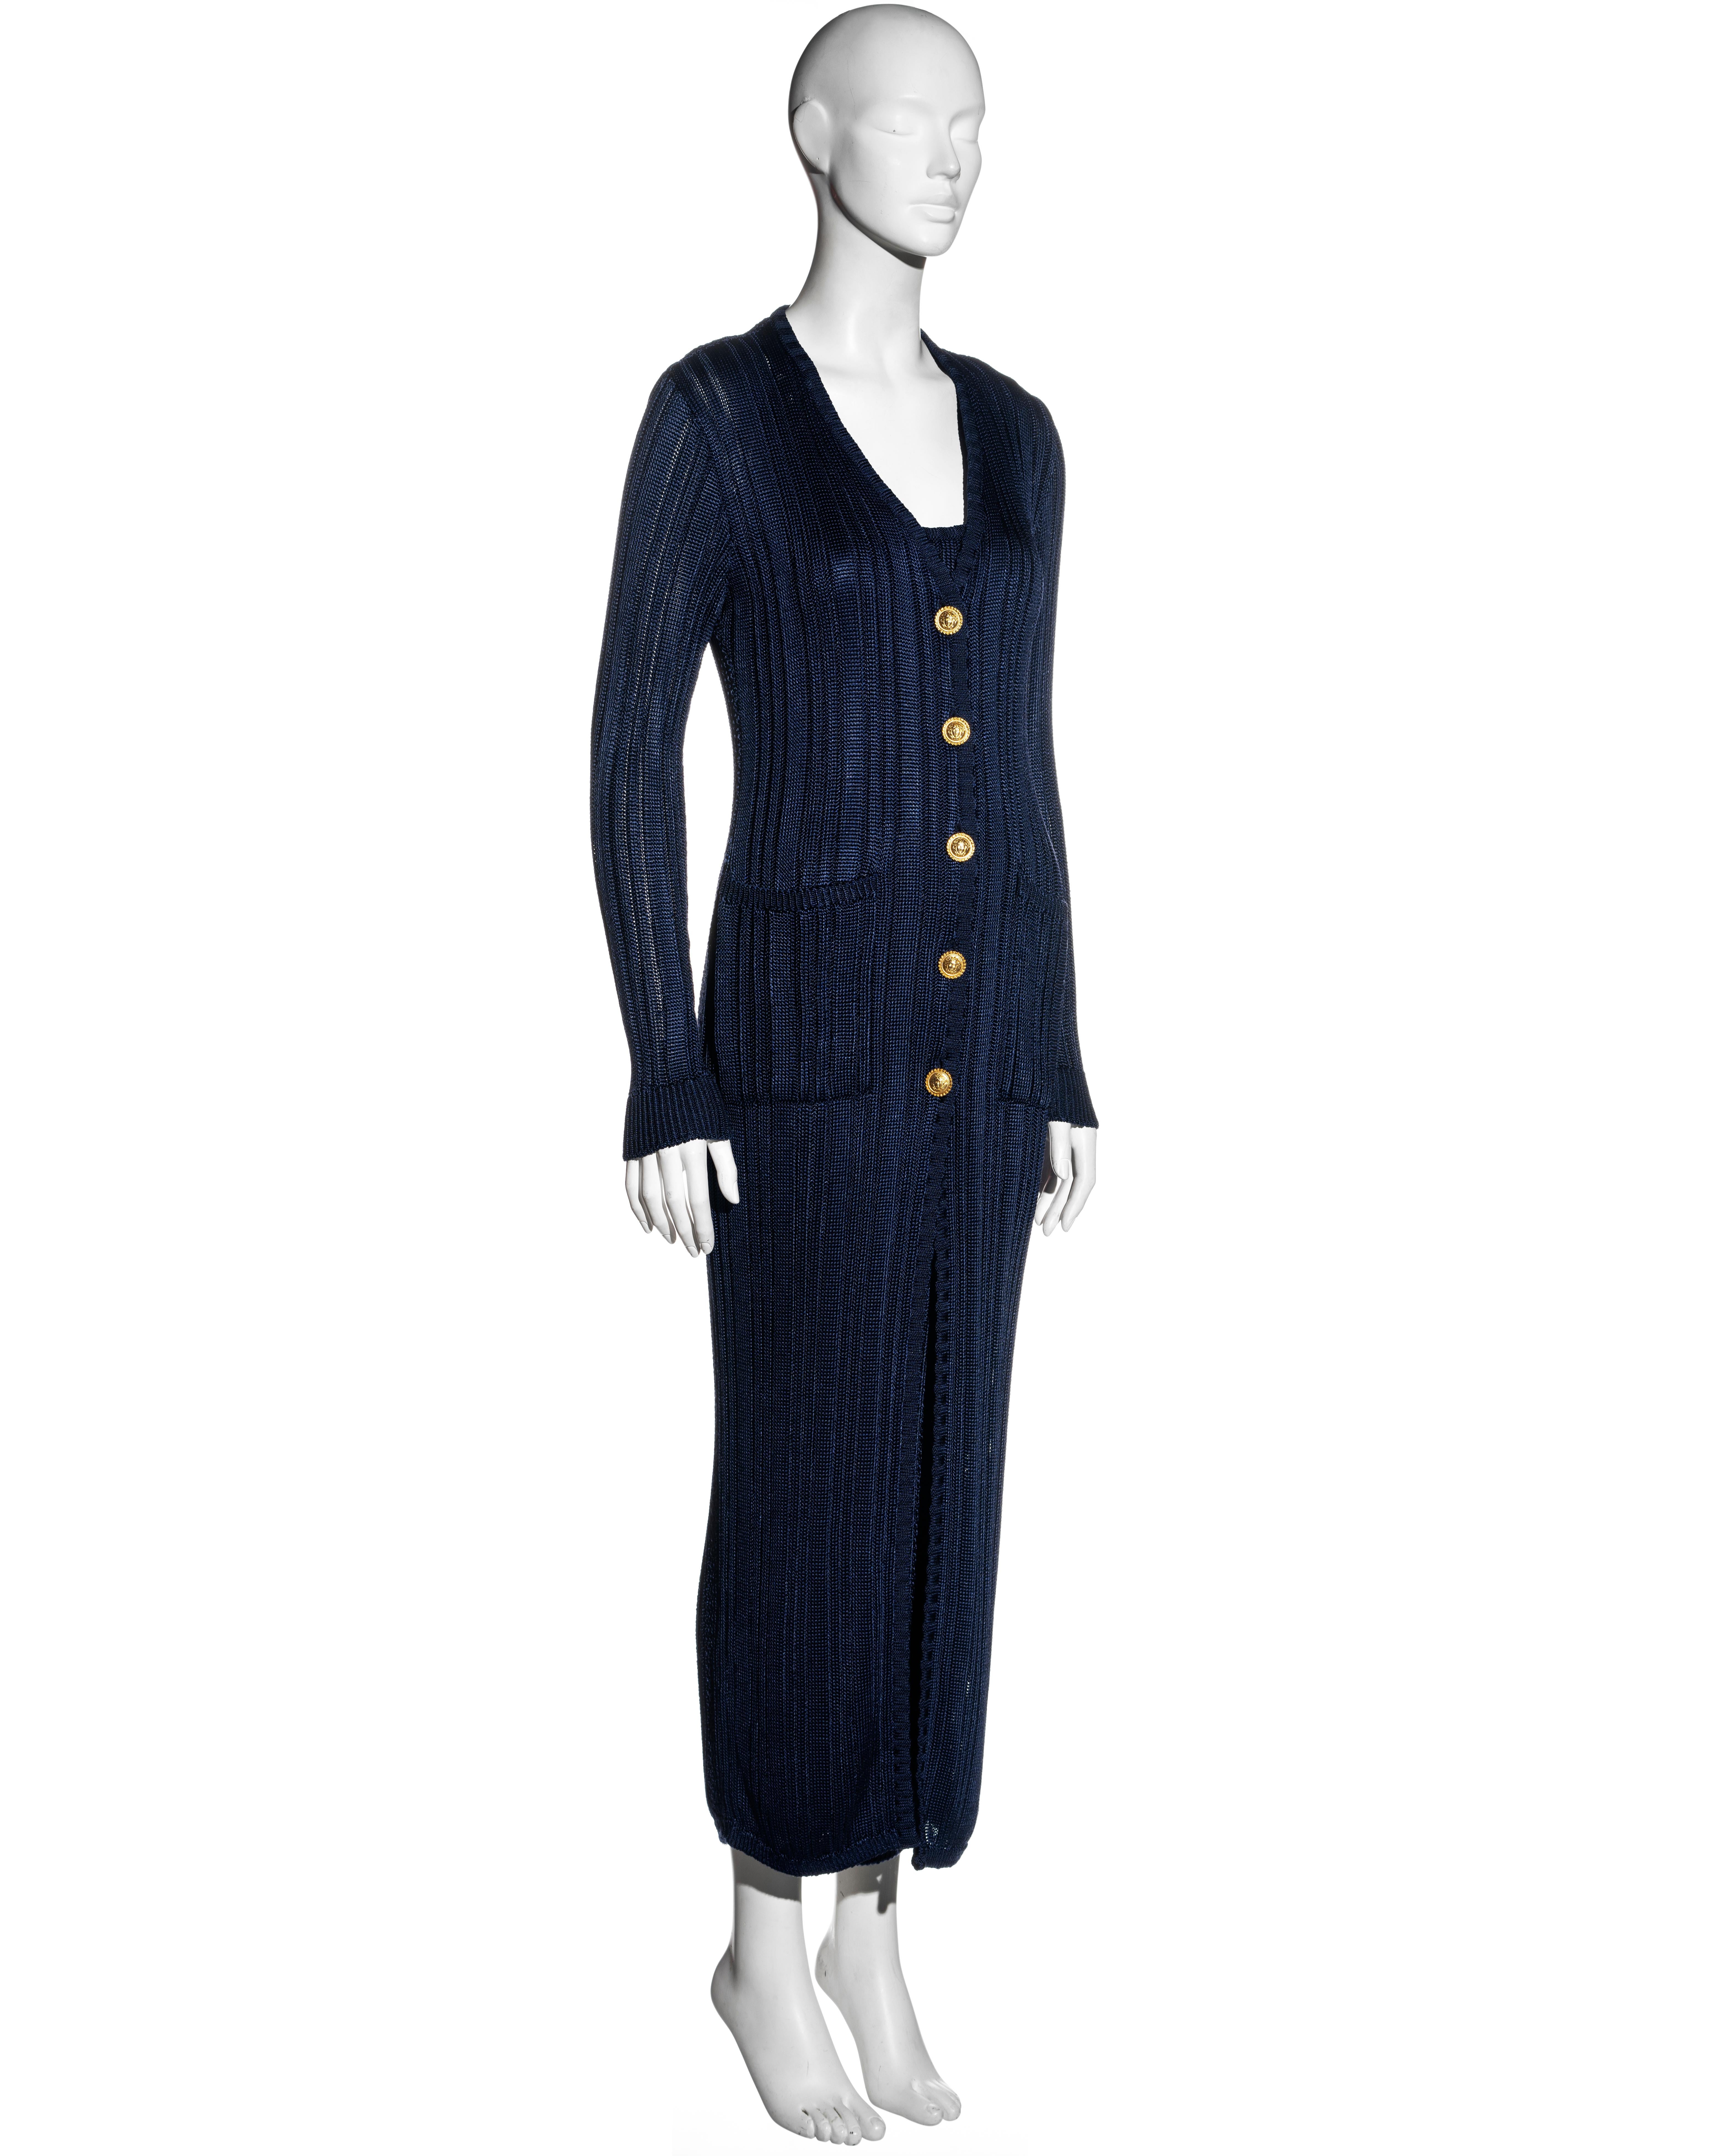 Women's Gianni Versace navy blue open-knit bodycon dress and cardigan set, fw 1993 For Sale